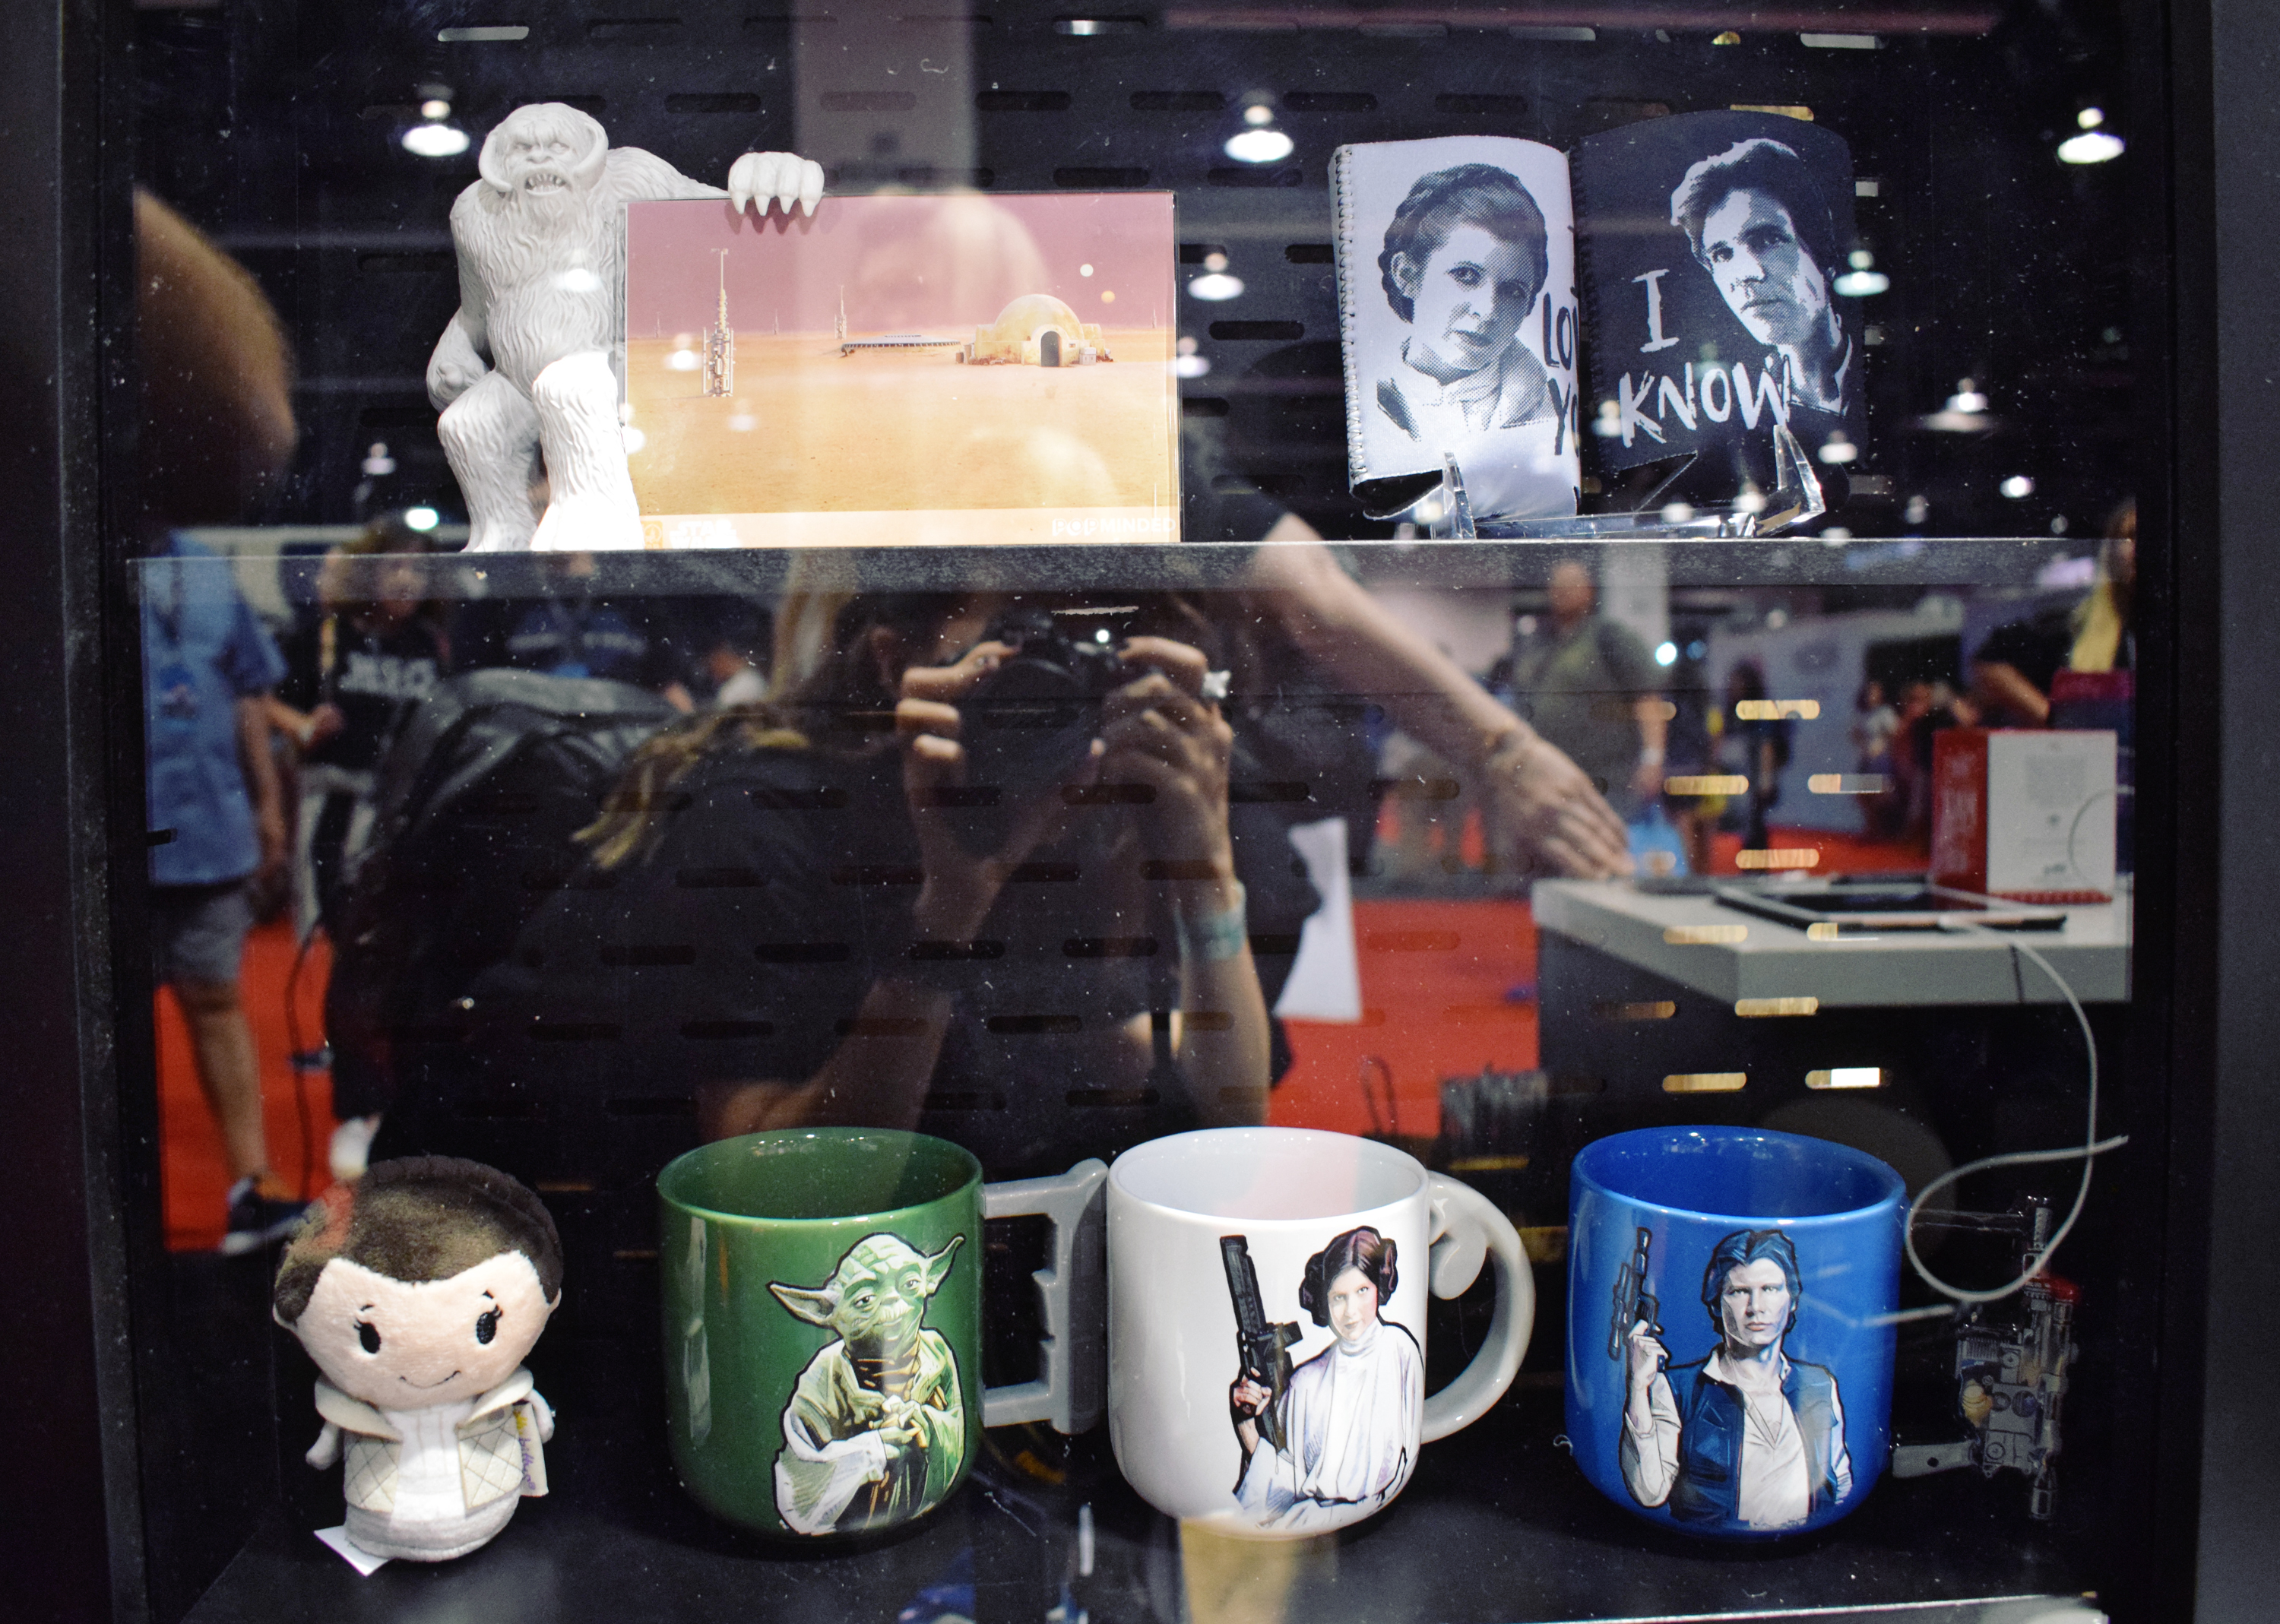 D23 Expo: Star Wars at the Hallmark Booth | Anakin and His Angel